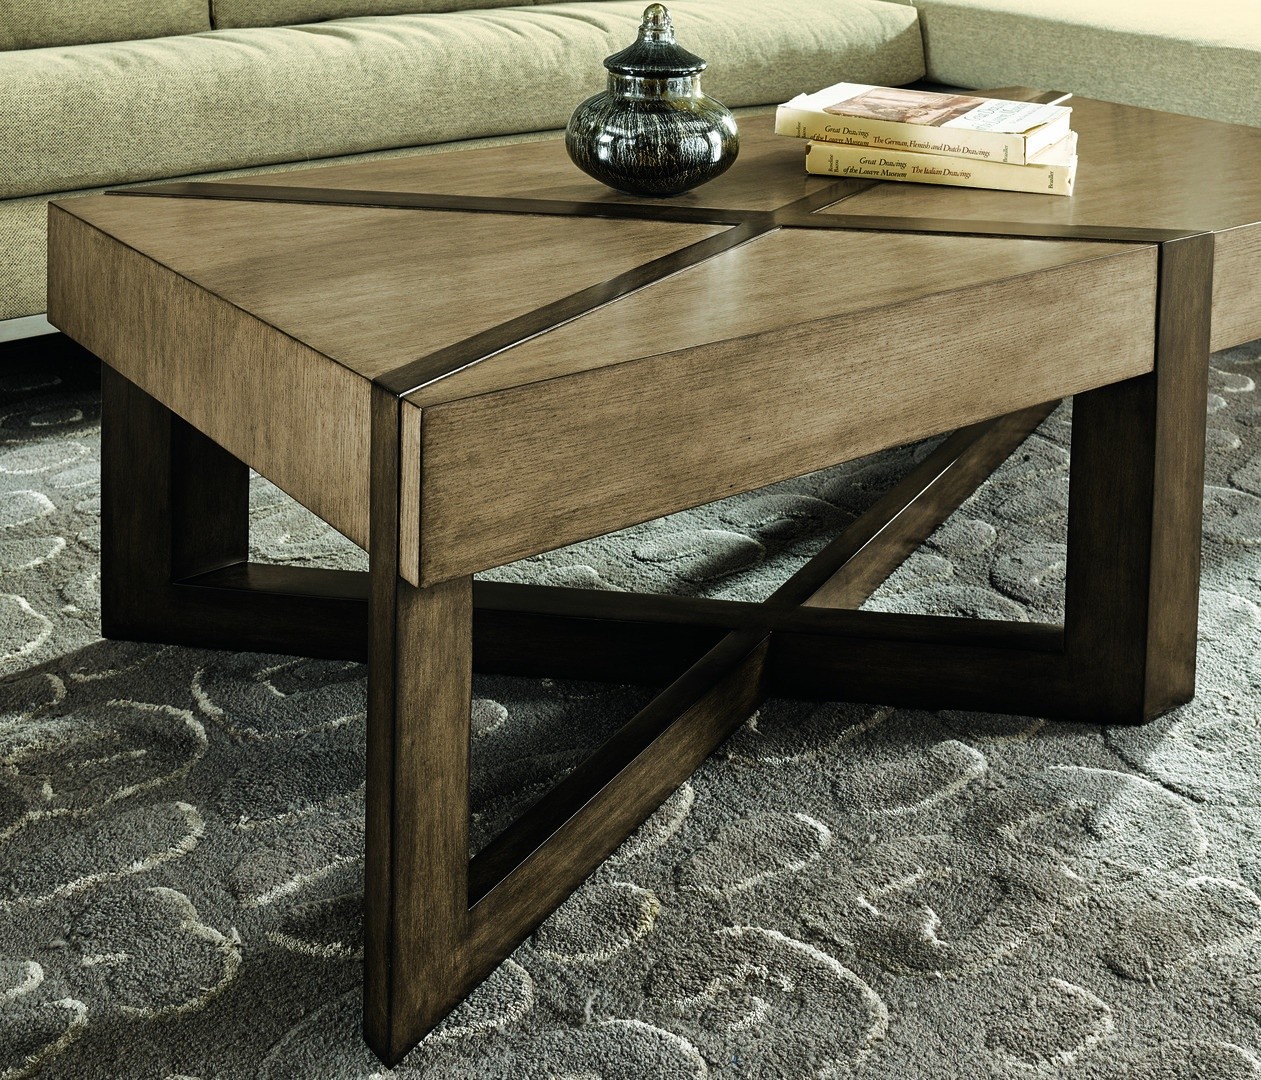 Strong and bold looking modern style wooden coffee table